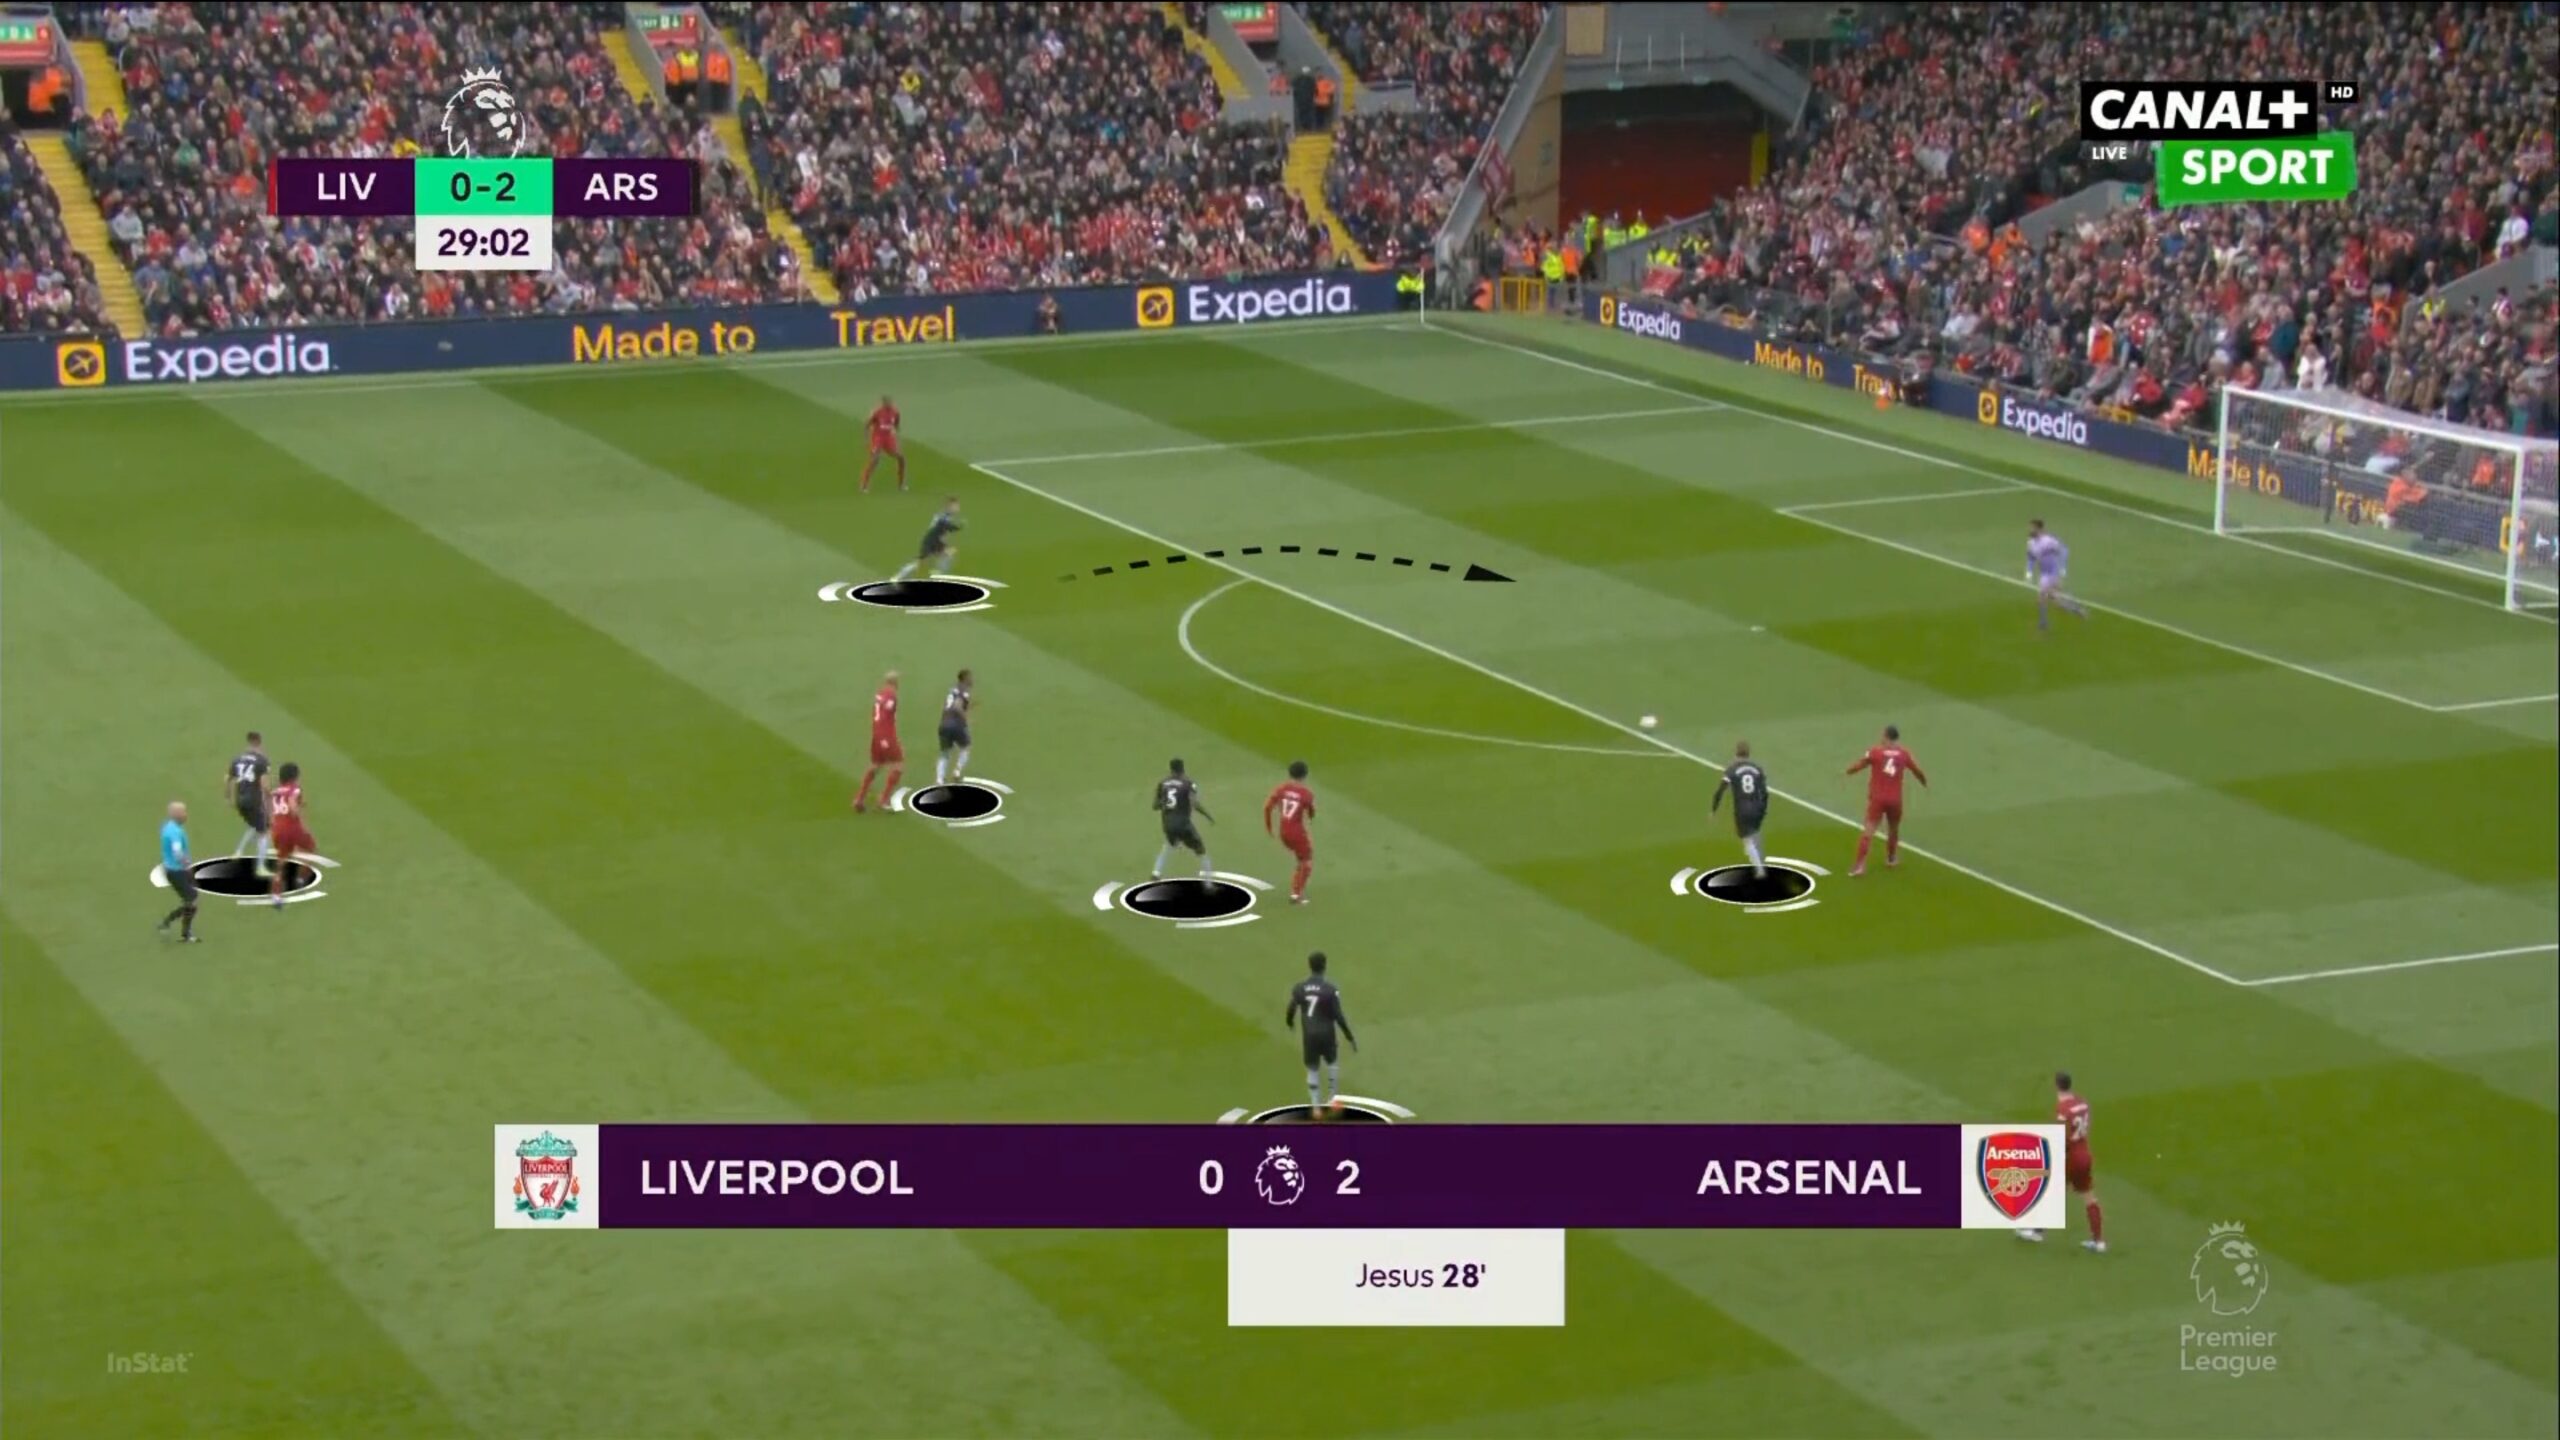 caption of a match between Liverpool and Arsenal, focusing on the attackers movements